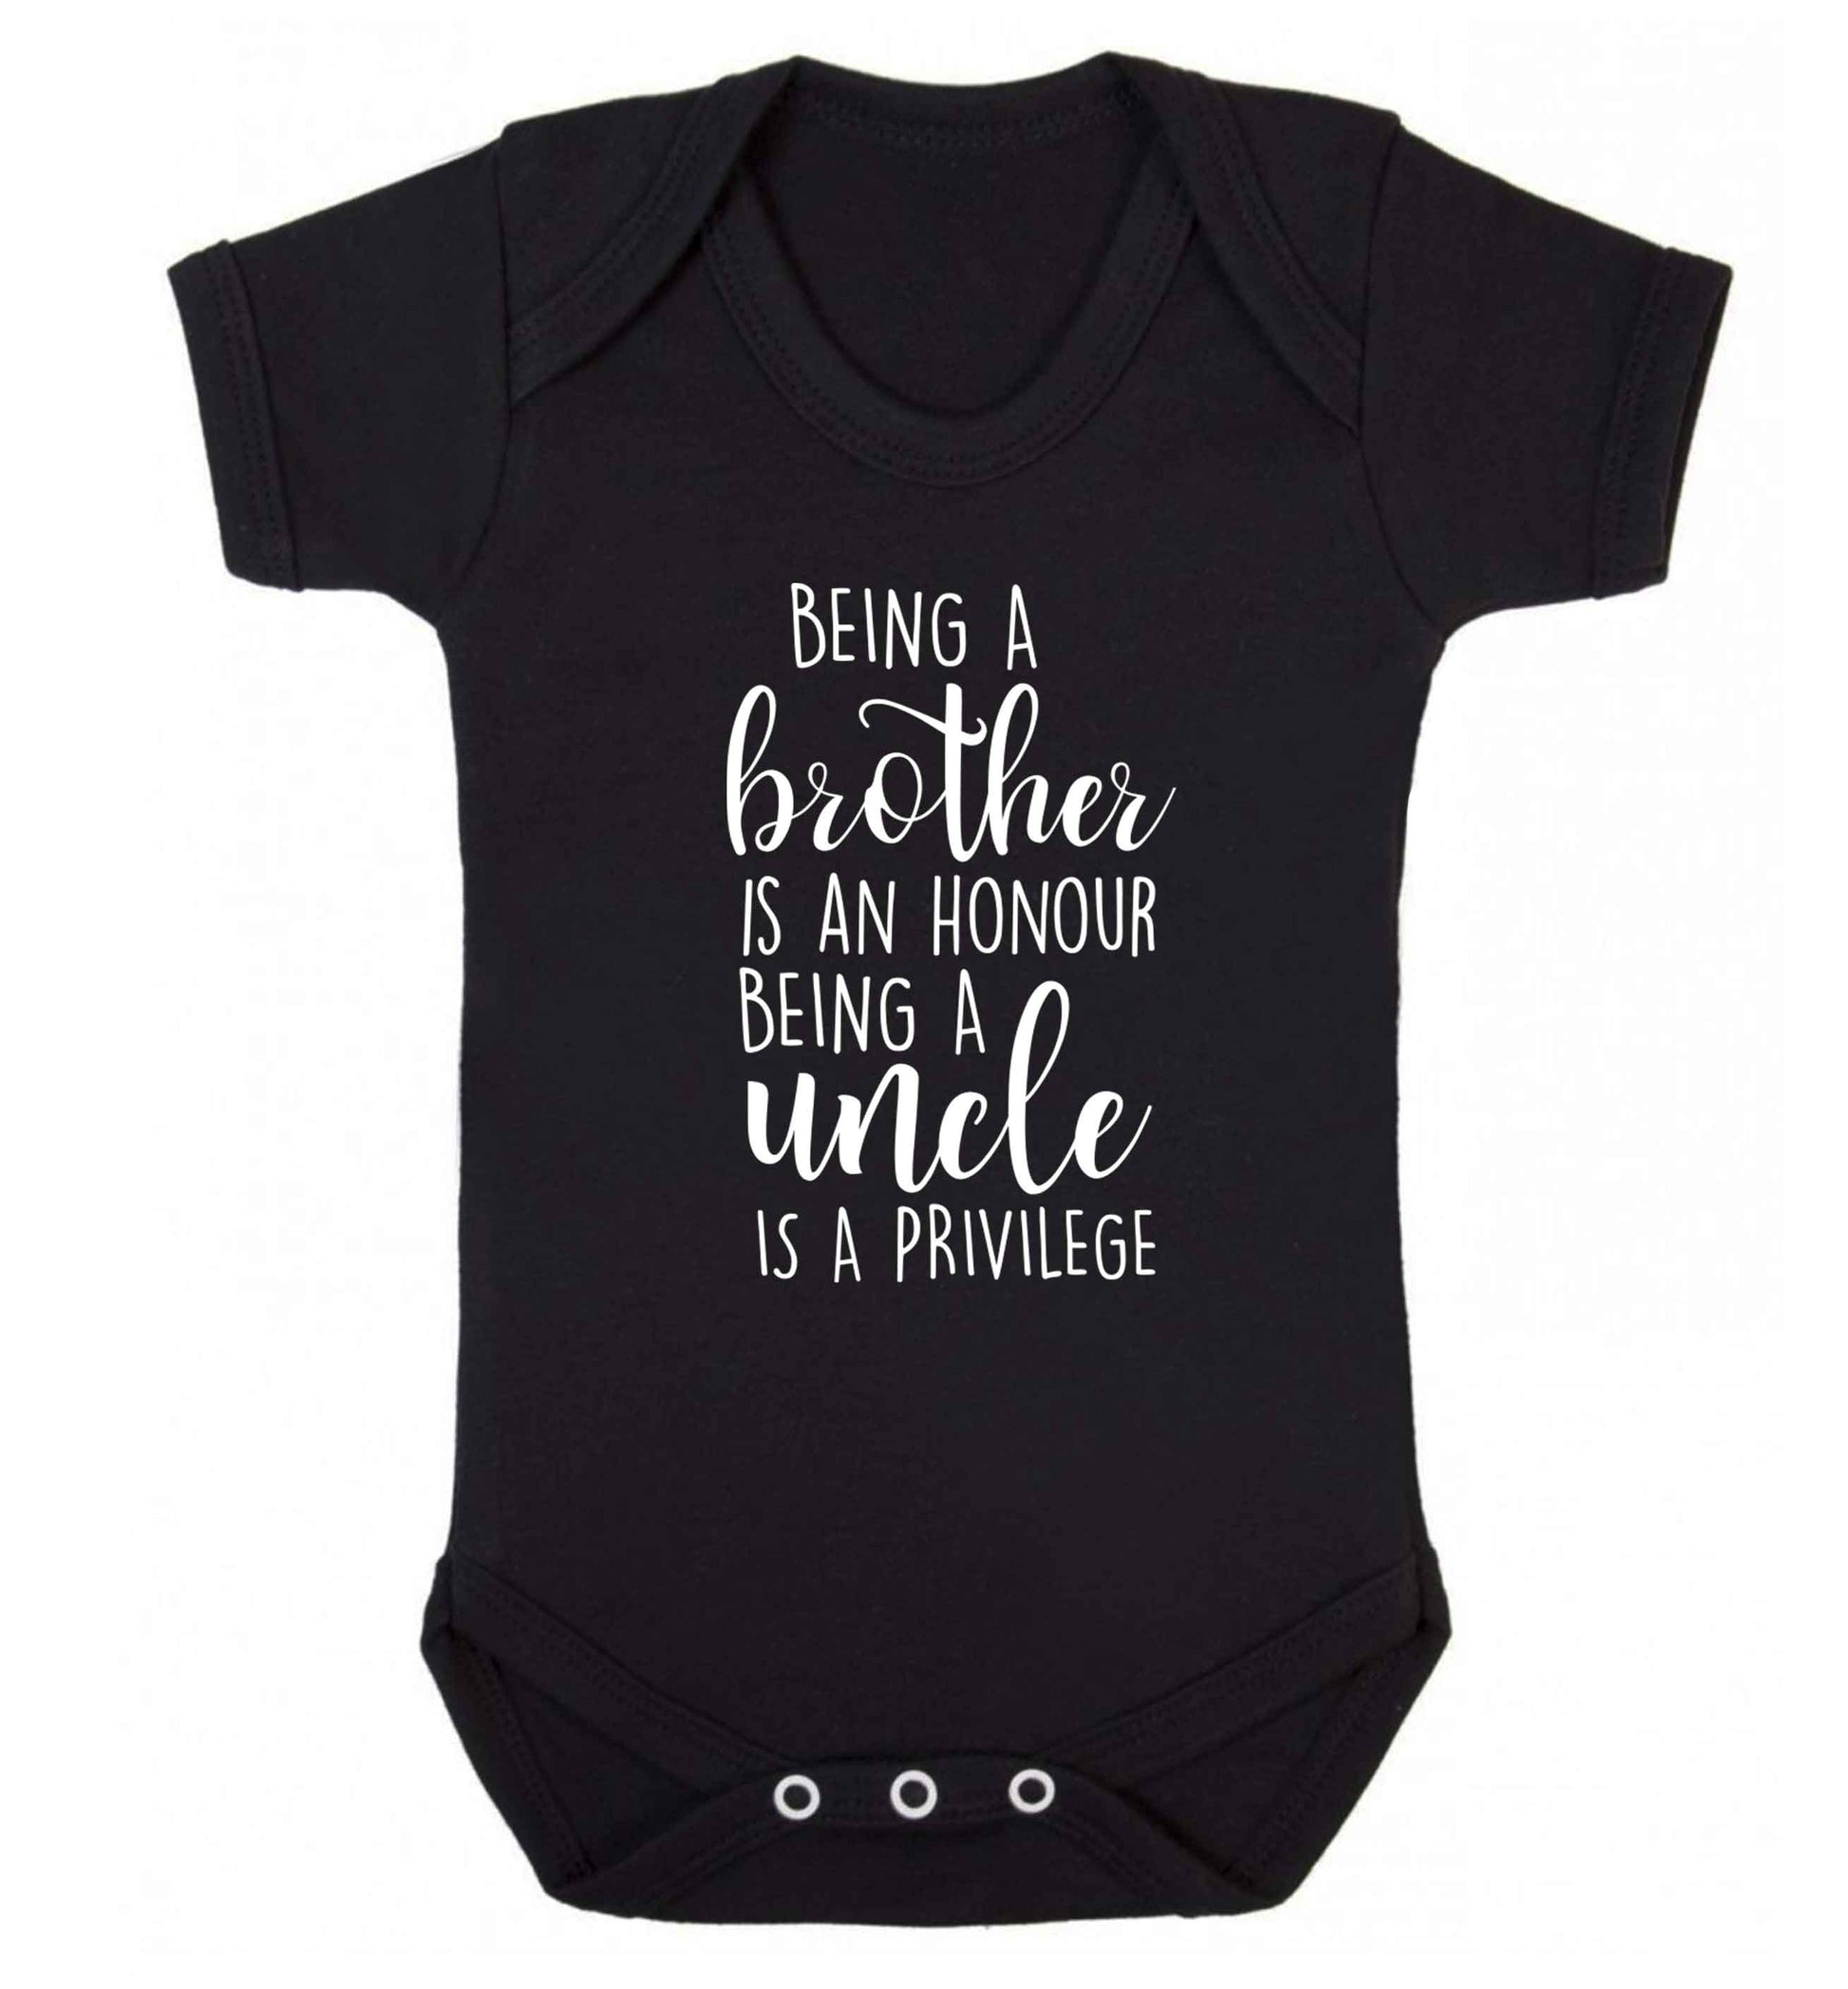 Being a brother is an honour being an uncle is a privilege Baby Vest black 18-24 months